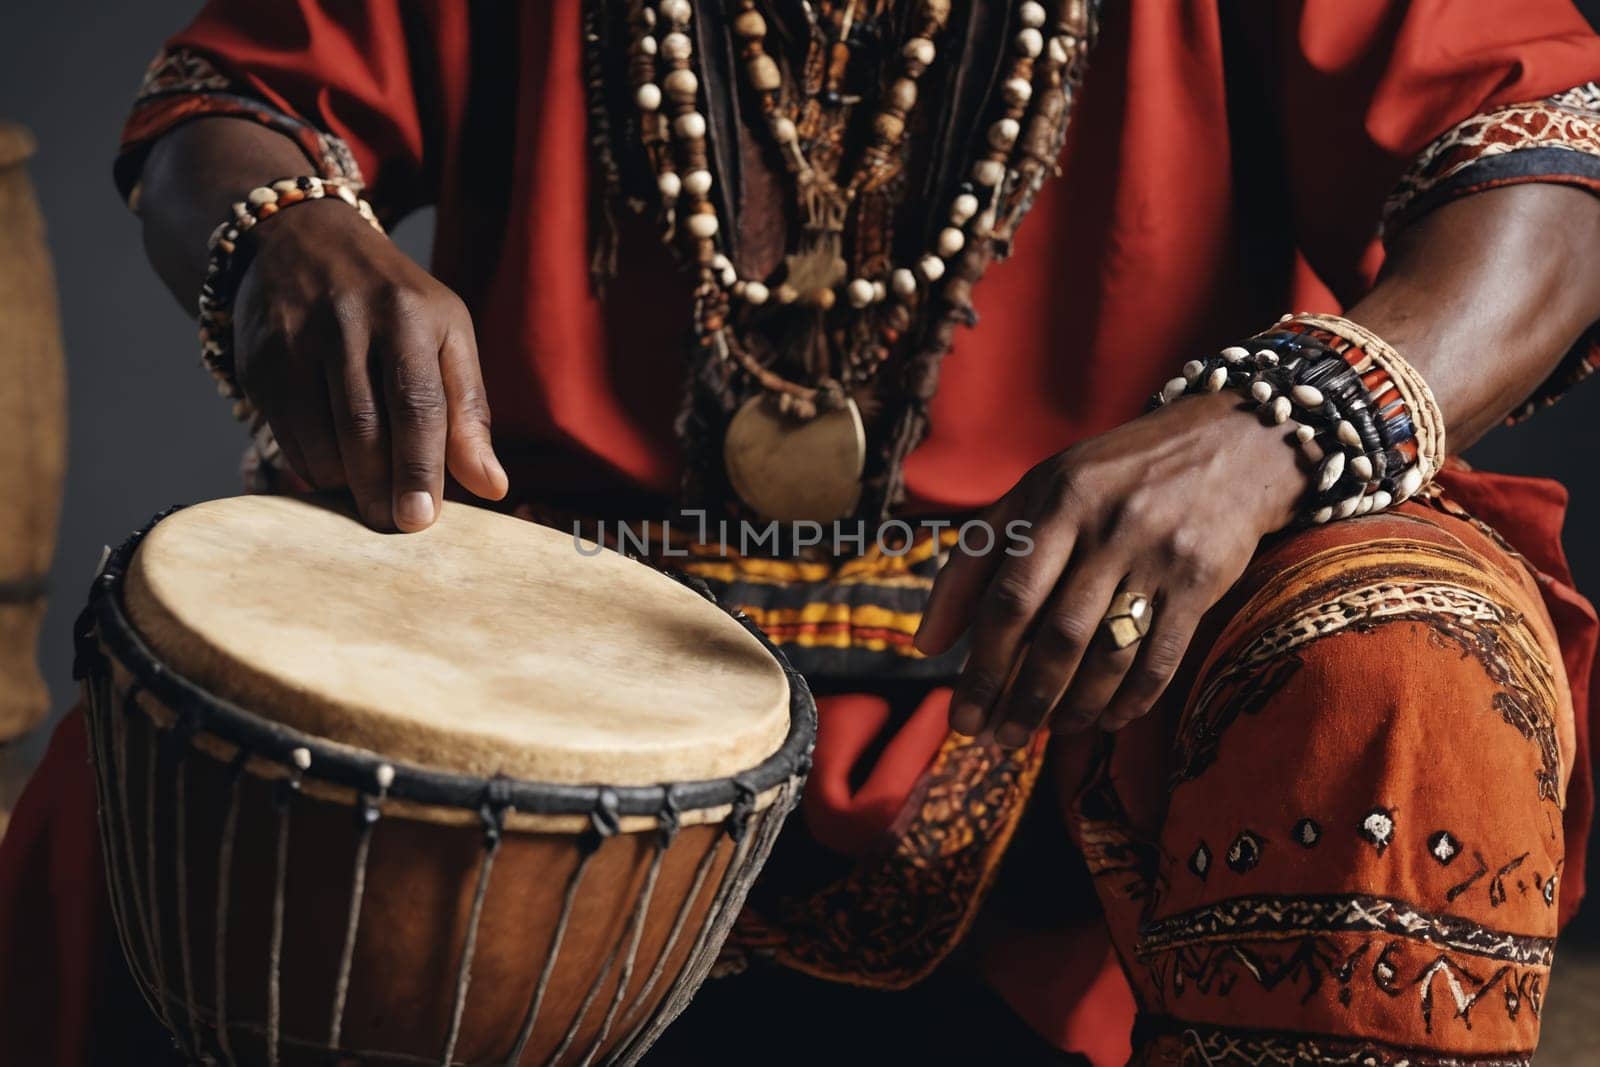 Pulse of the Motherland: Close-Up of Djembe Drumming in Tribal Wear by Andre1ns